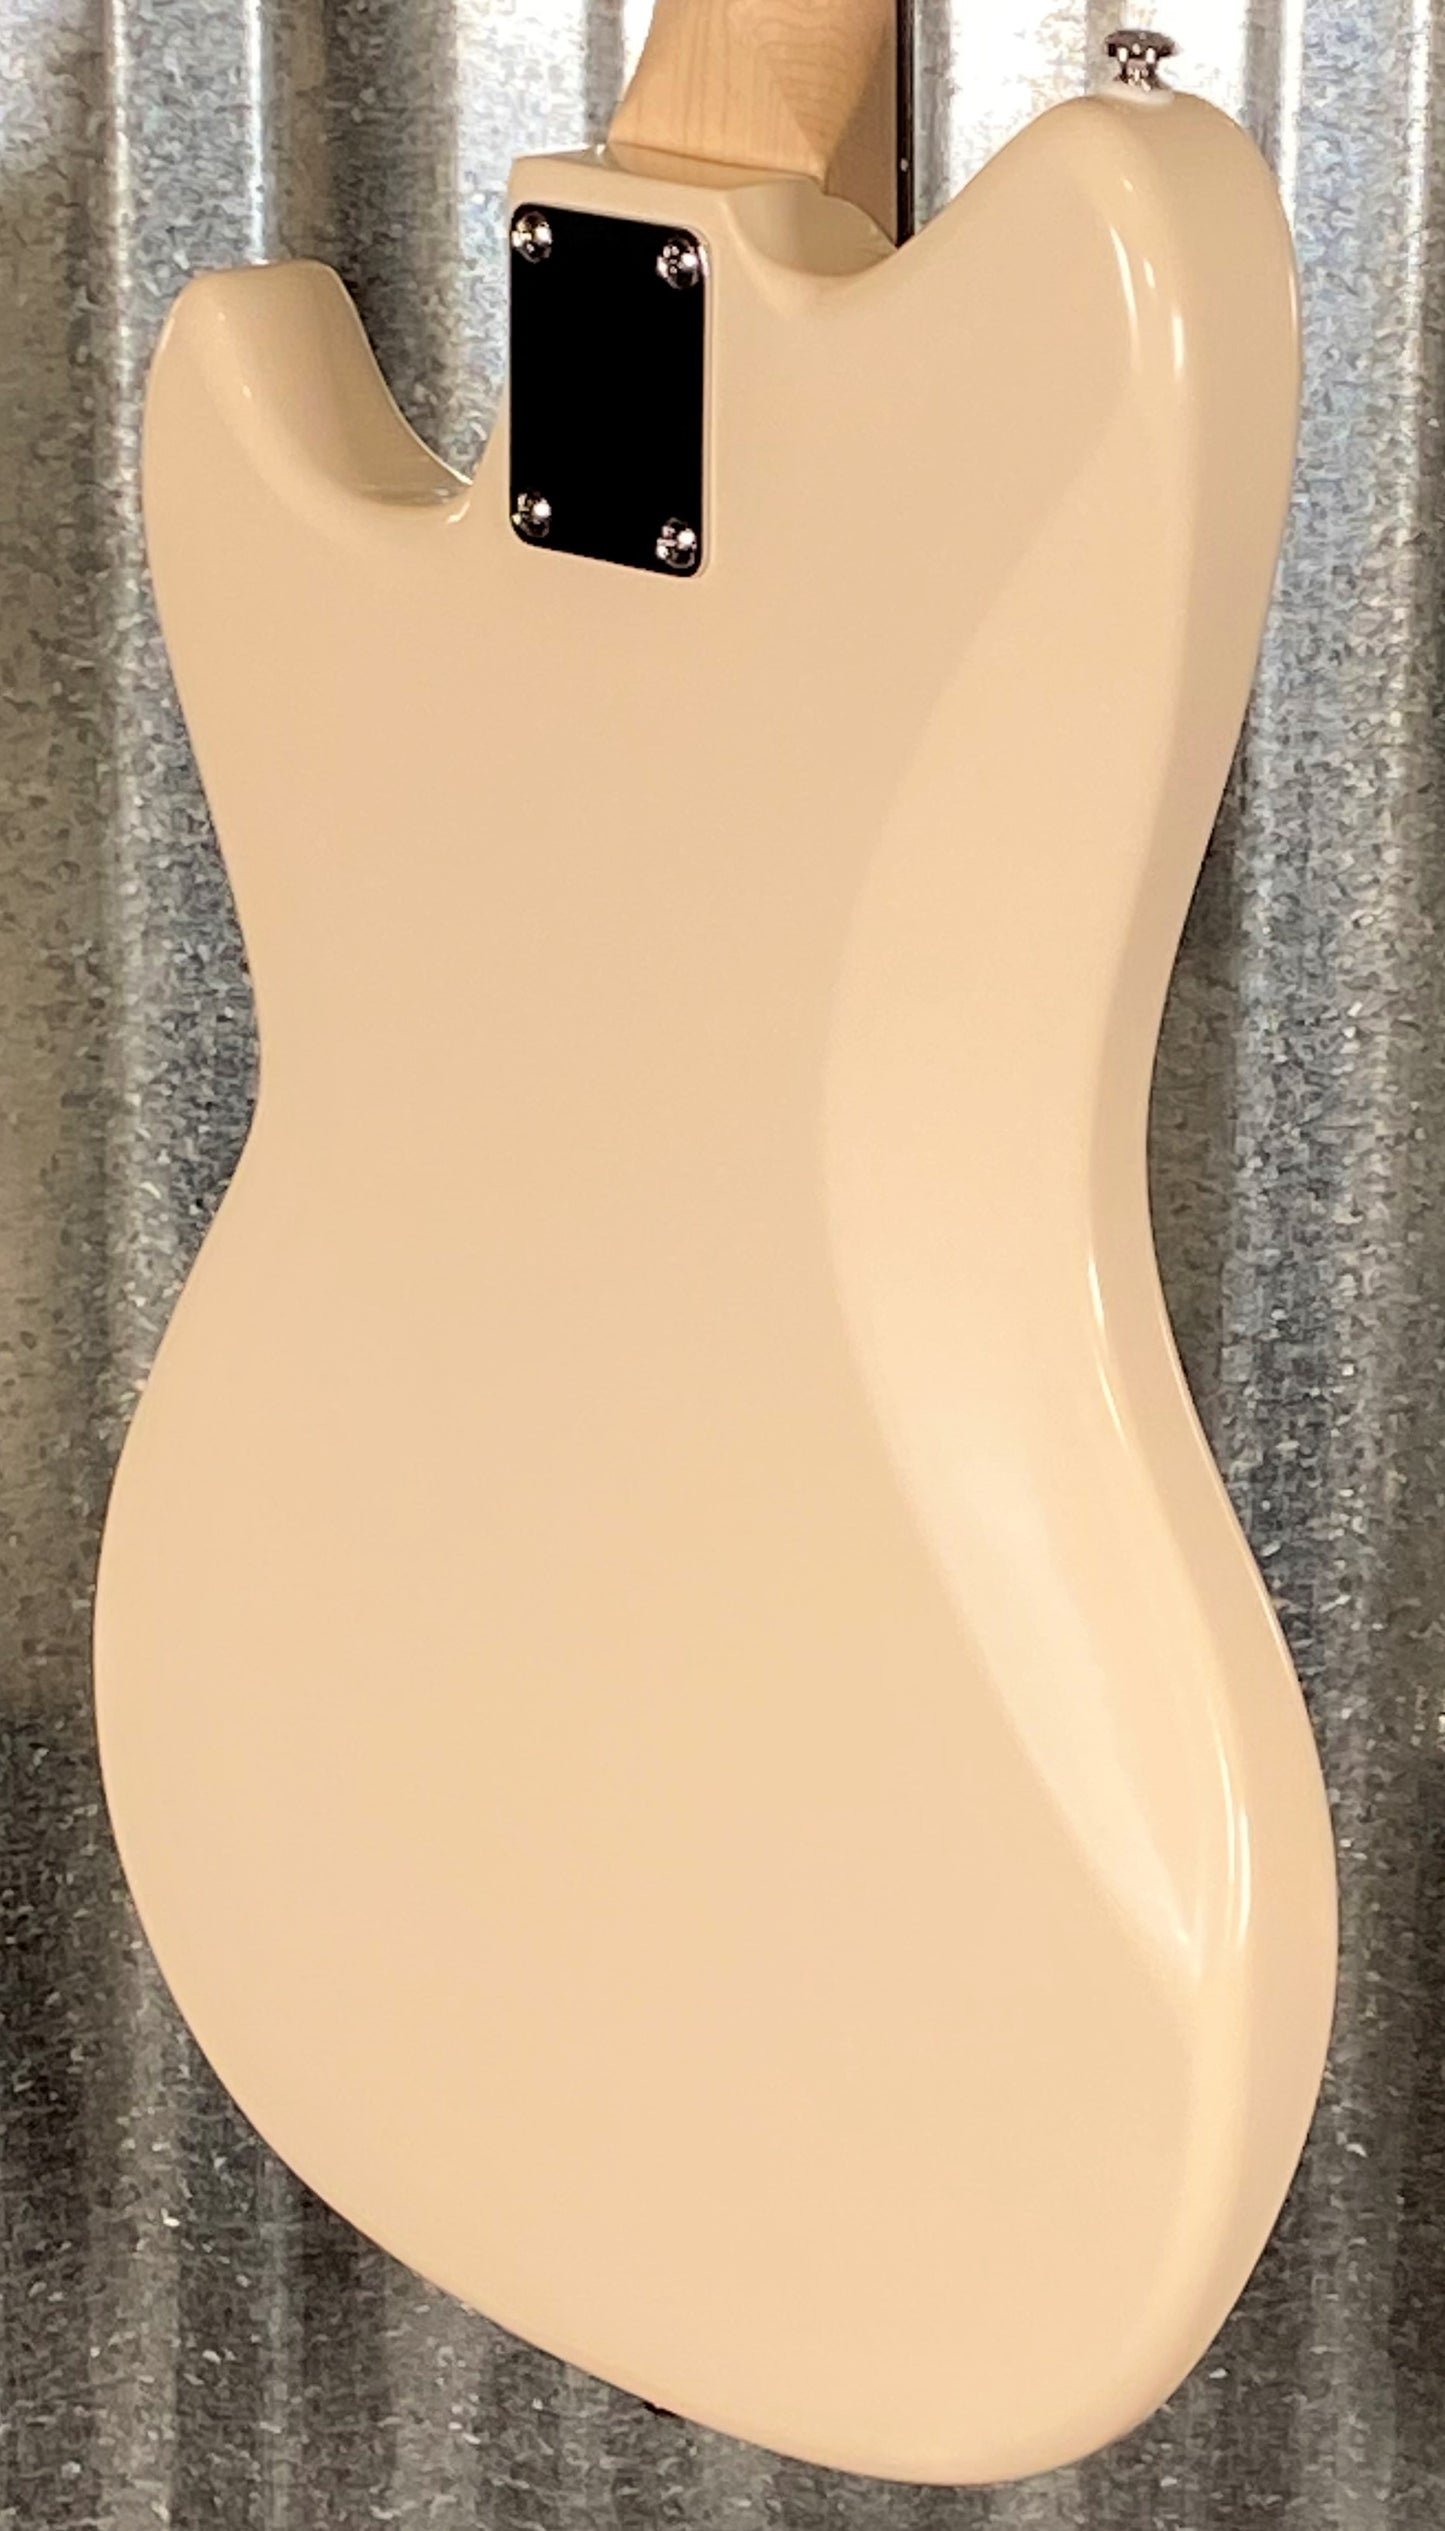 G&L Guitars Tribute Fallout Bass Short Scale 4 String Olympic White #1502